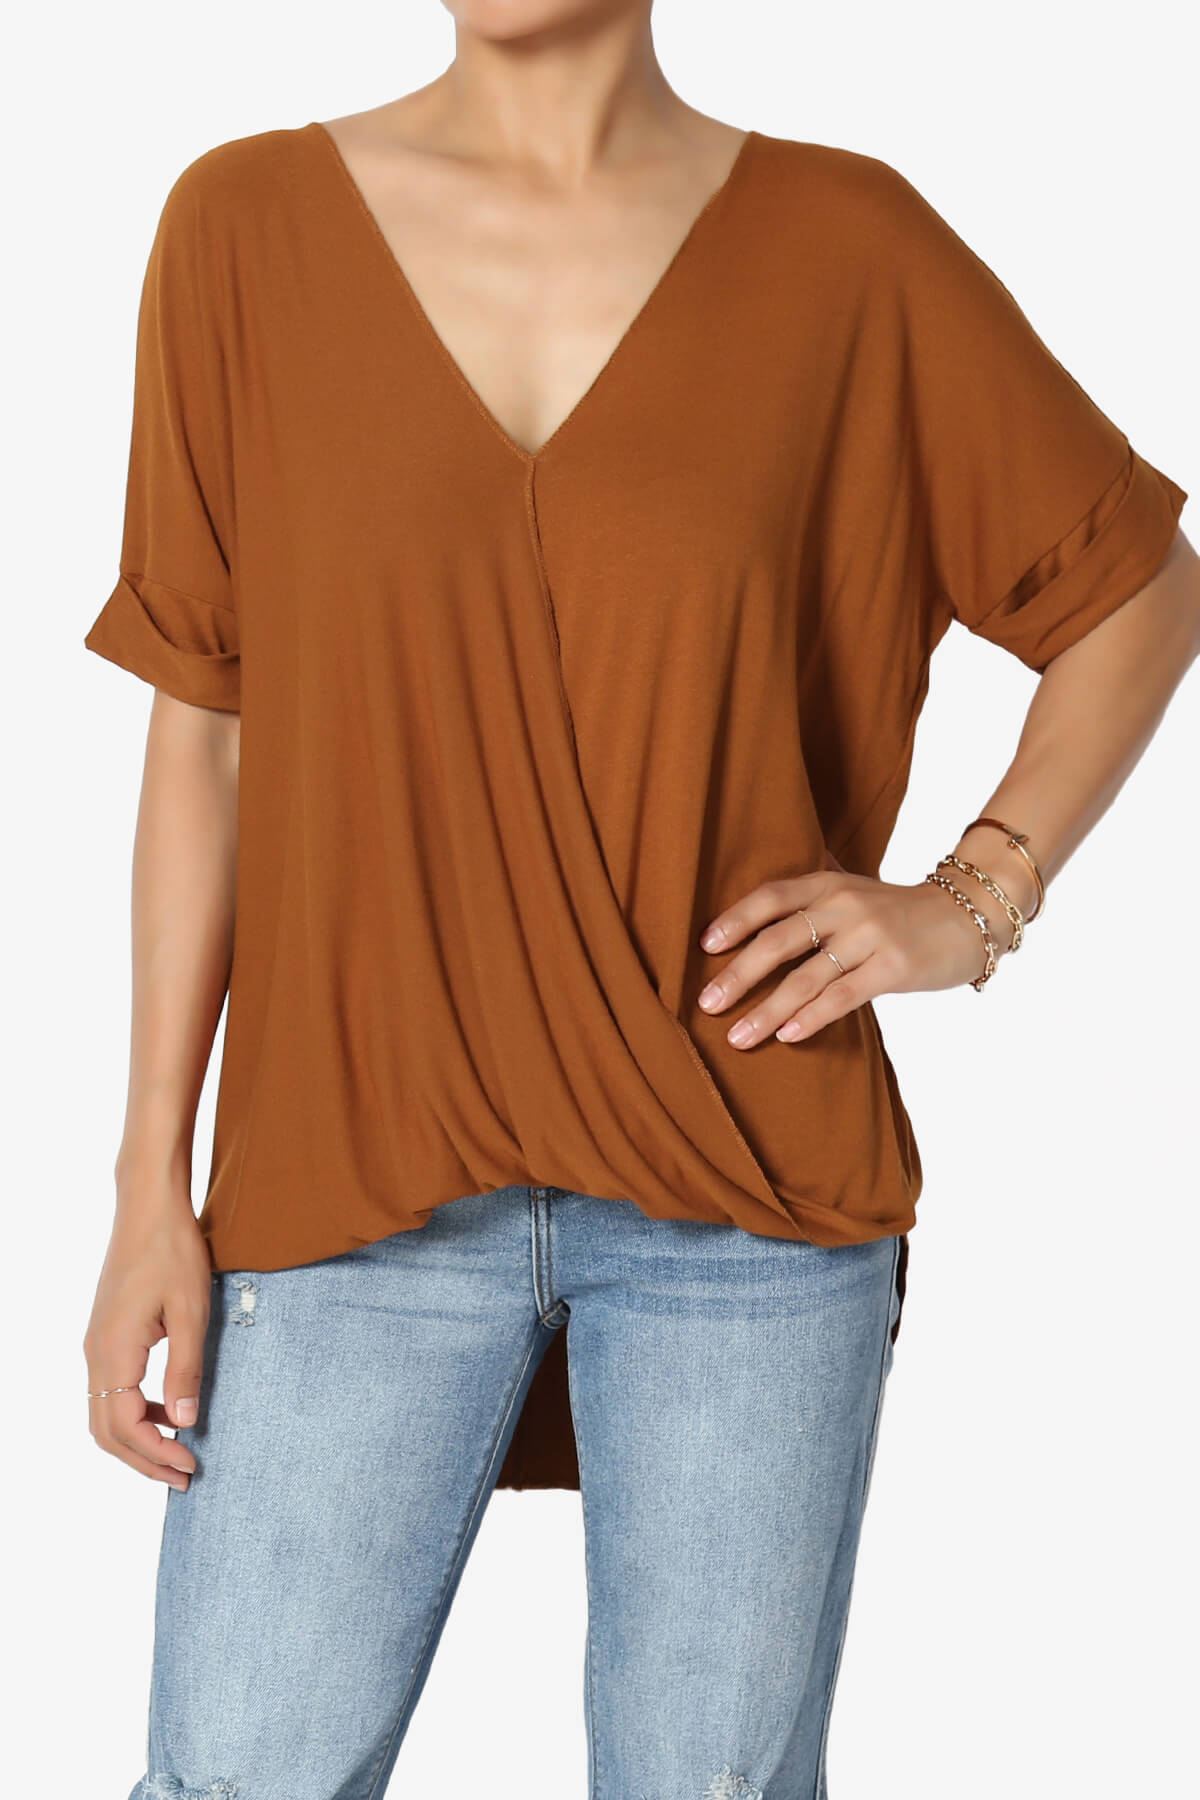 Load image into Gallery viewer, Tackle Wrap Hi-Low Crepe Knit Top ALMOND_1
